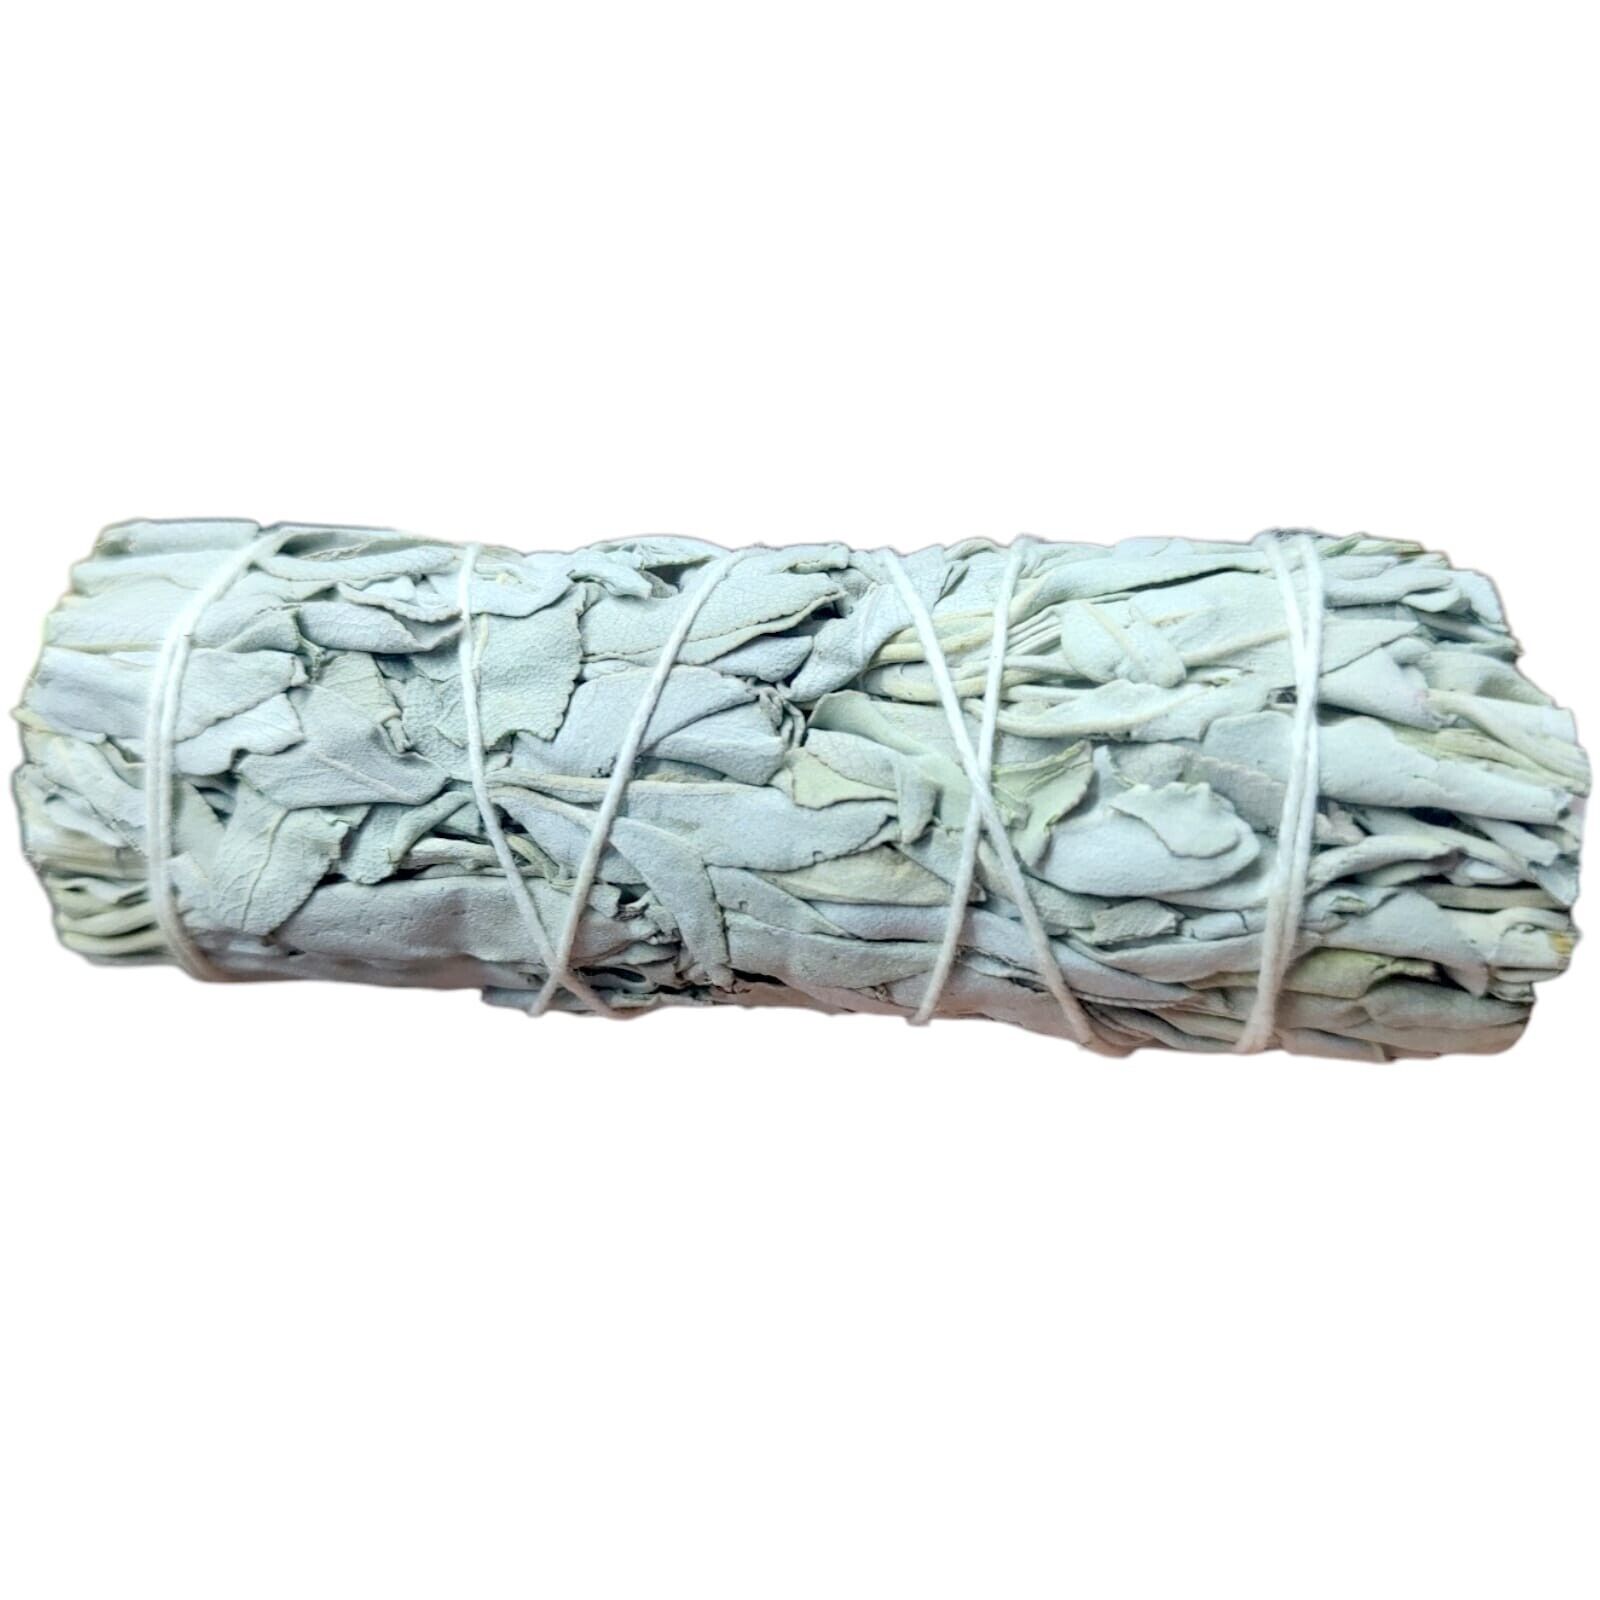 White Sage - 11cm Salvia Blanca of the Best Quality